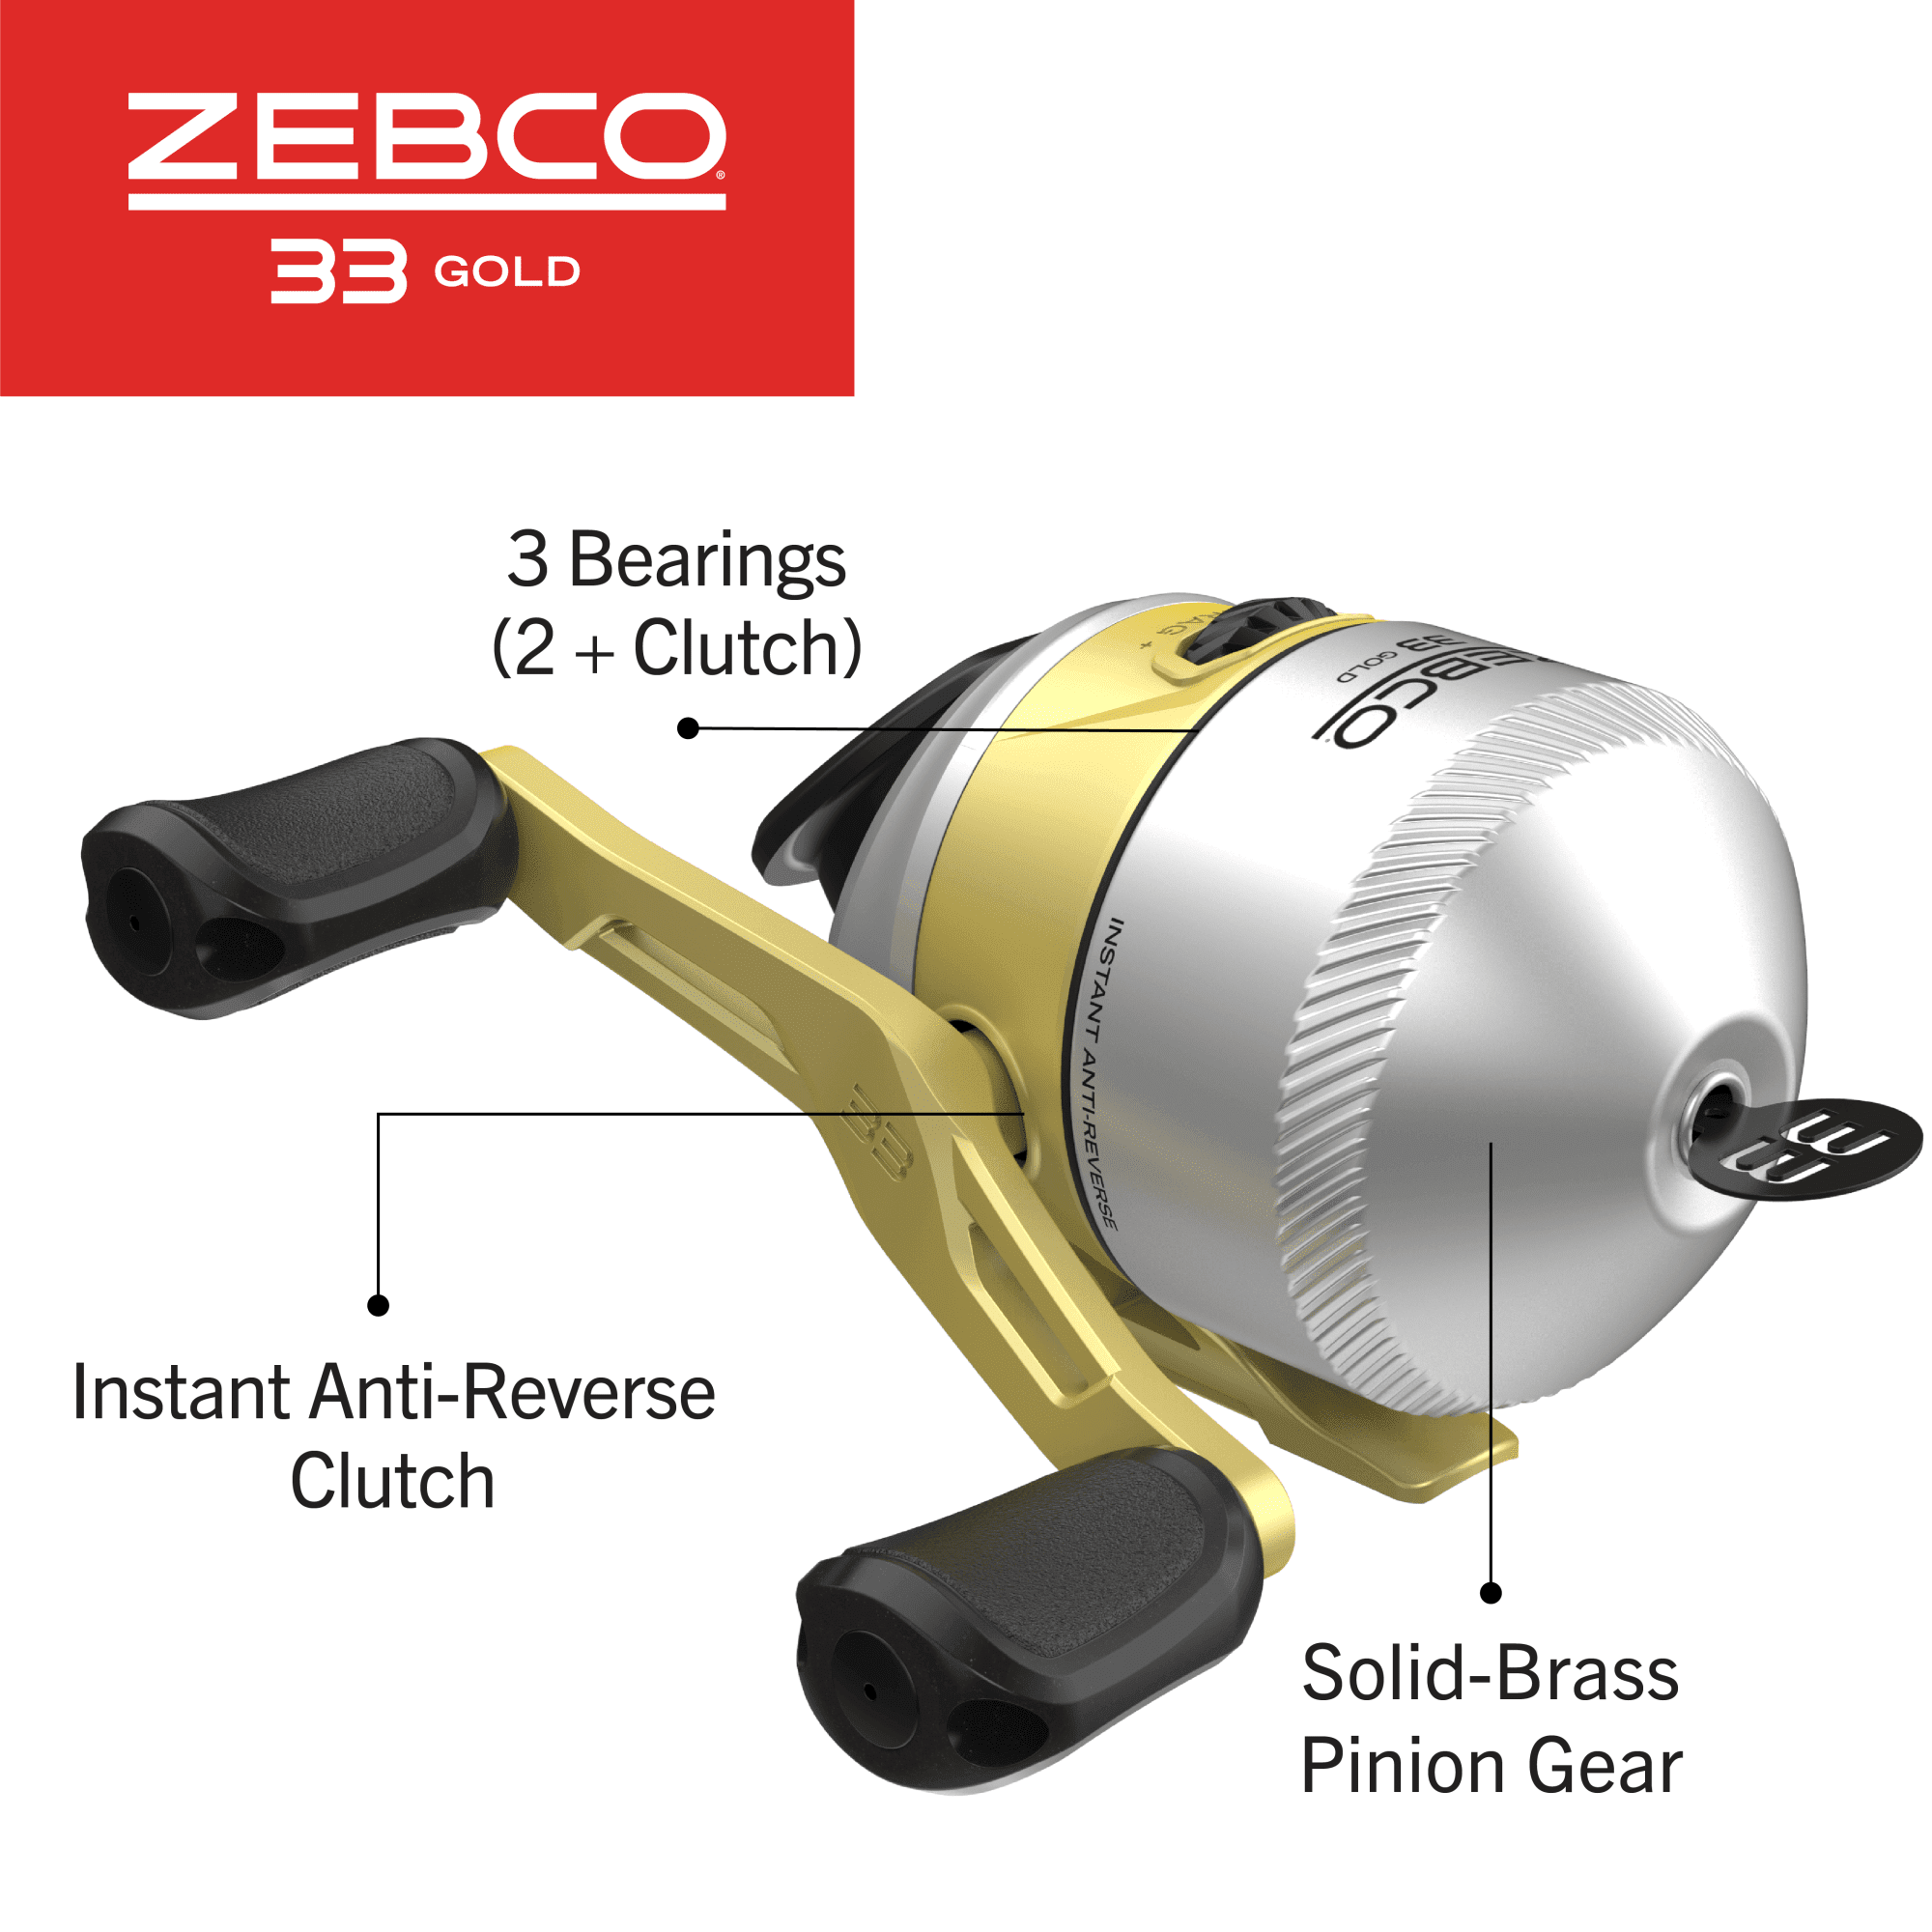 The Ultimate Reel for Success: Zebco 33 Review 